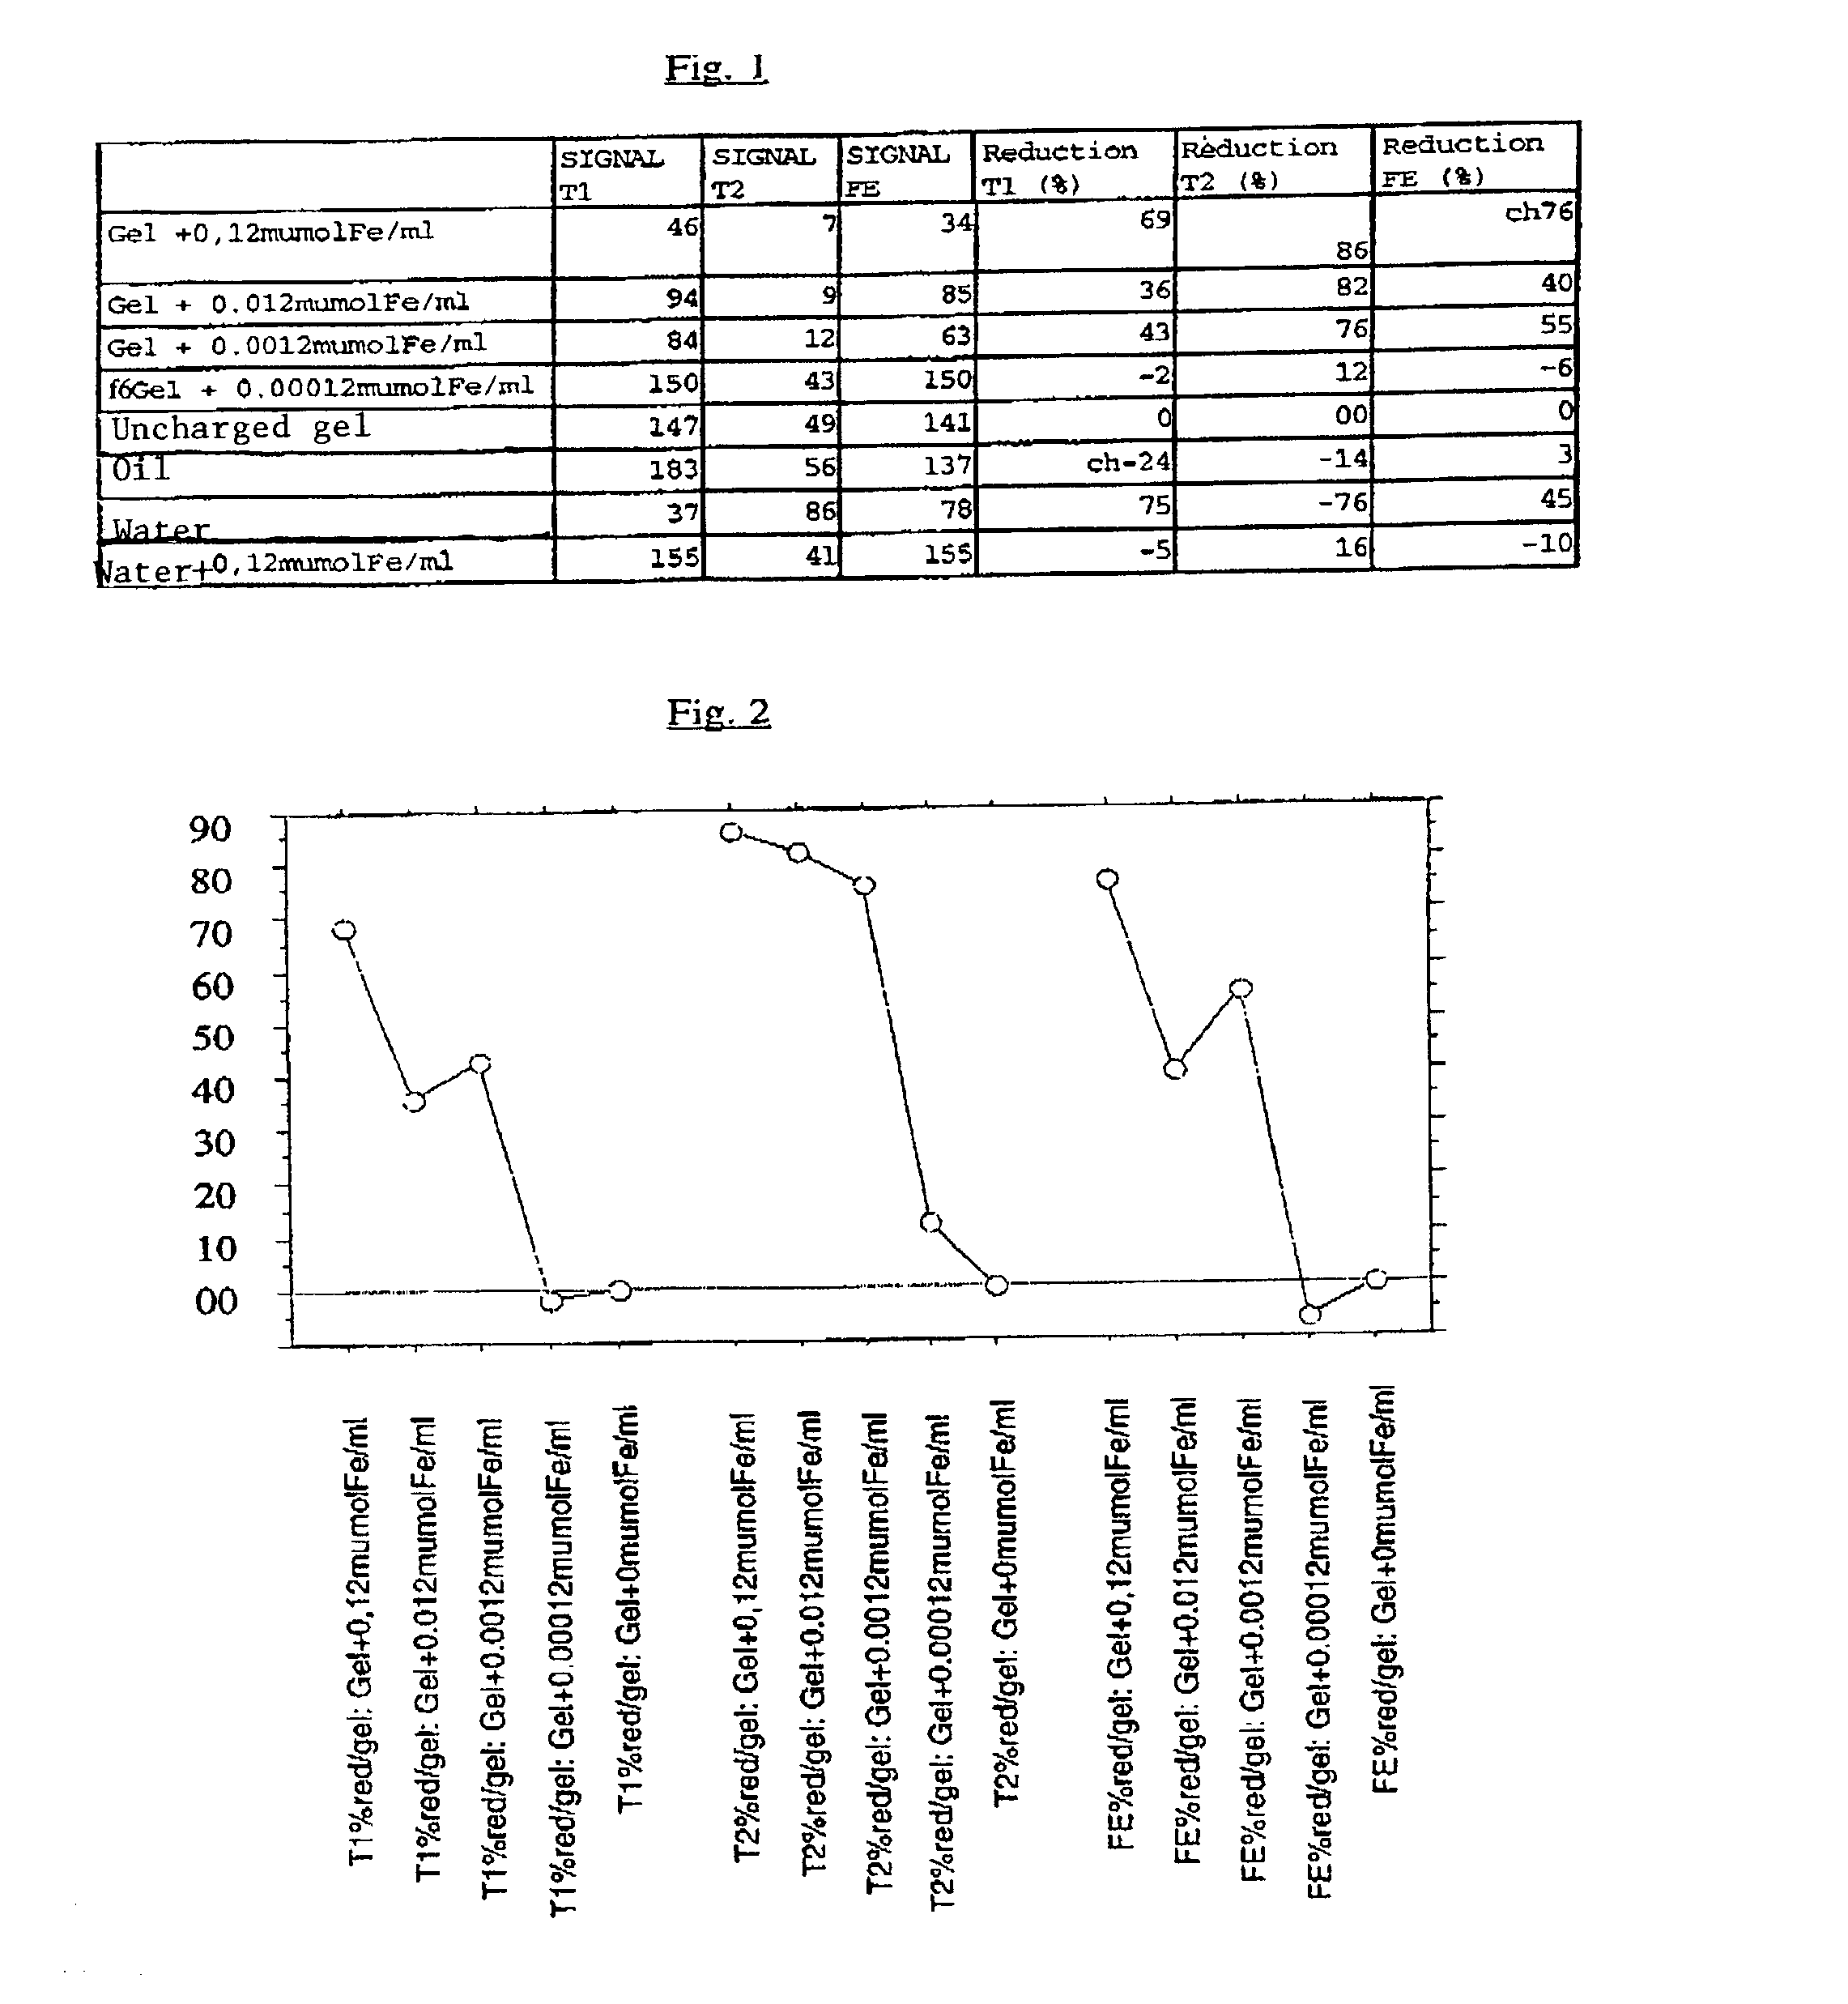 Hydrophilic polymer biomaterial having a specific magnetic resonance imaging signal and process for the preparation of said biomaterial